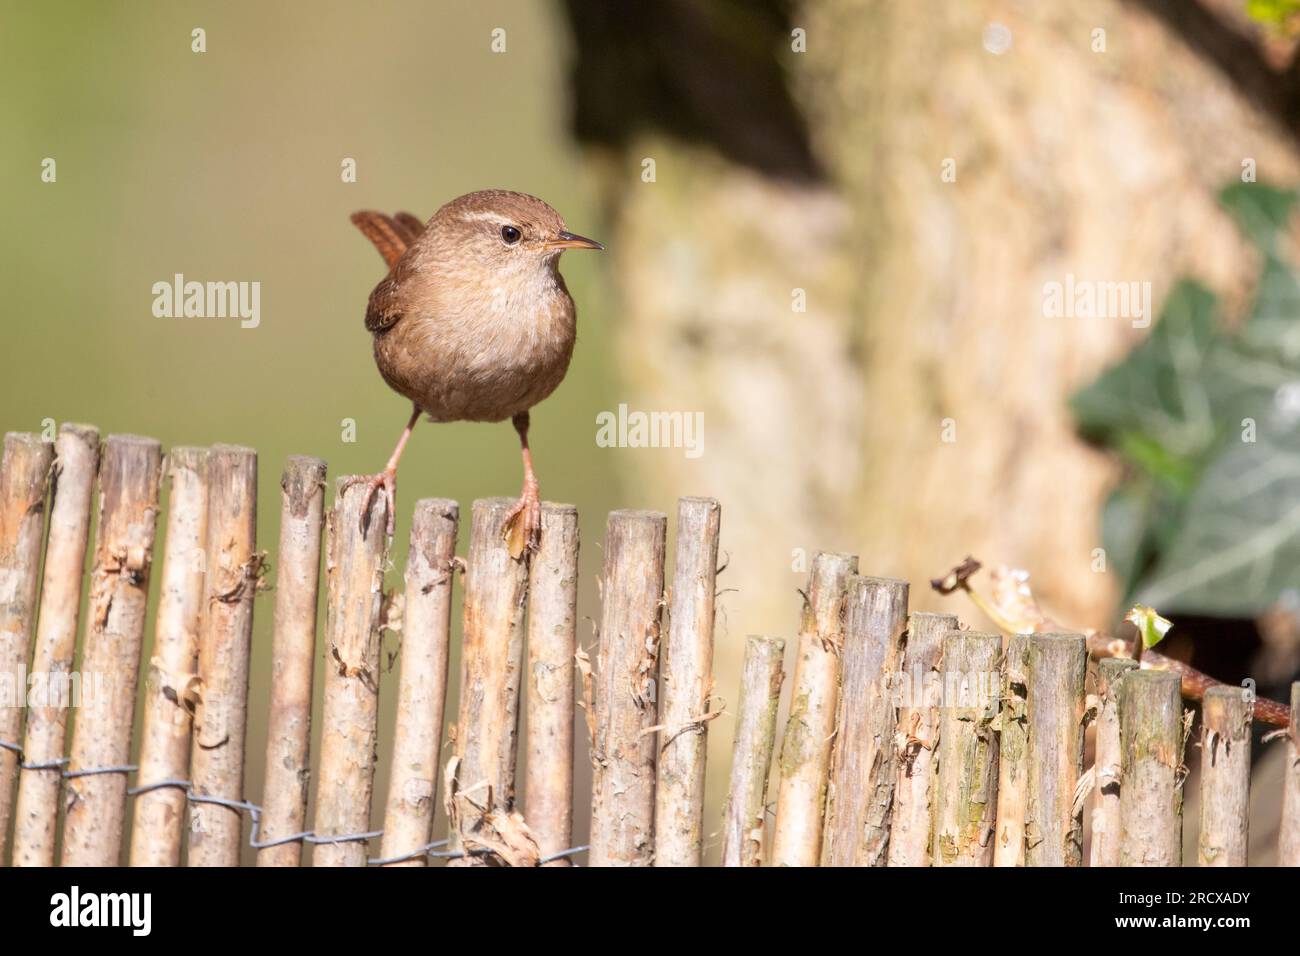 winter wren (Troglodytes troglodytes), perching on a wooden fence in the garden, front view, Netherlands Stock Photo